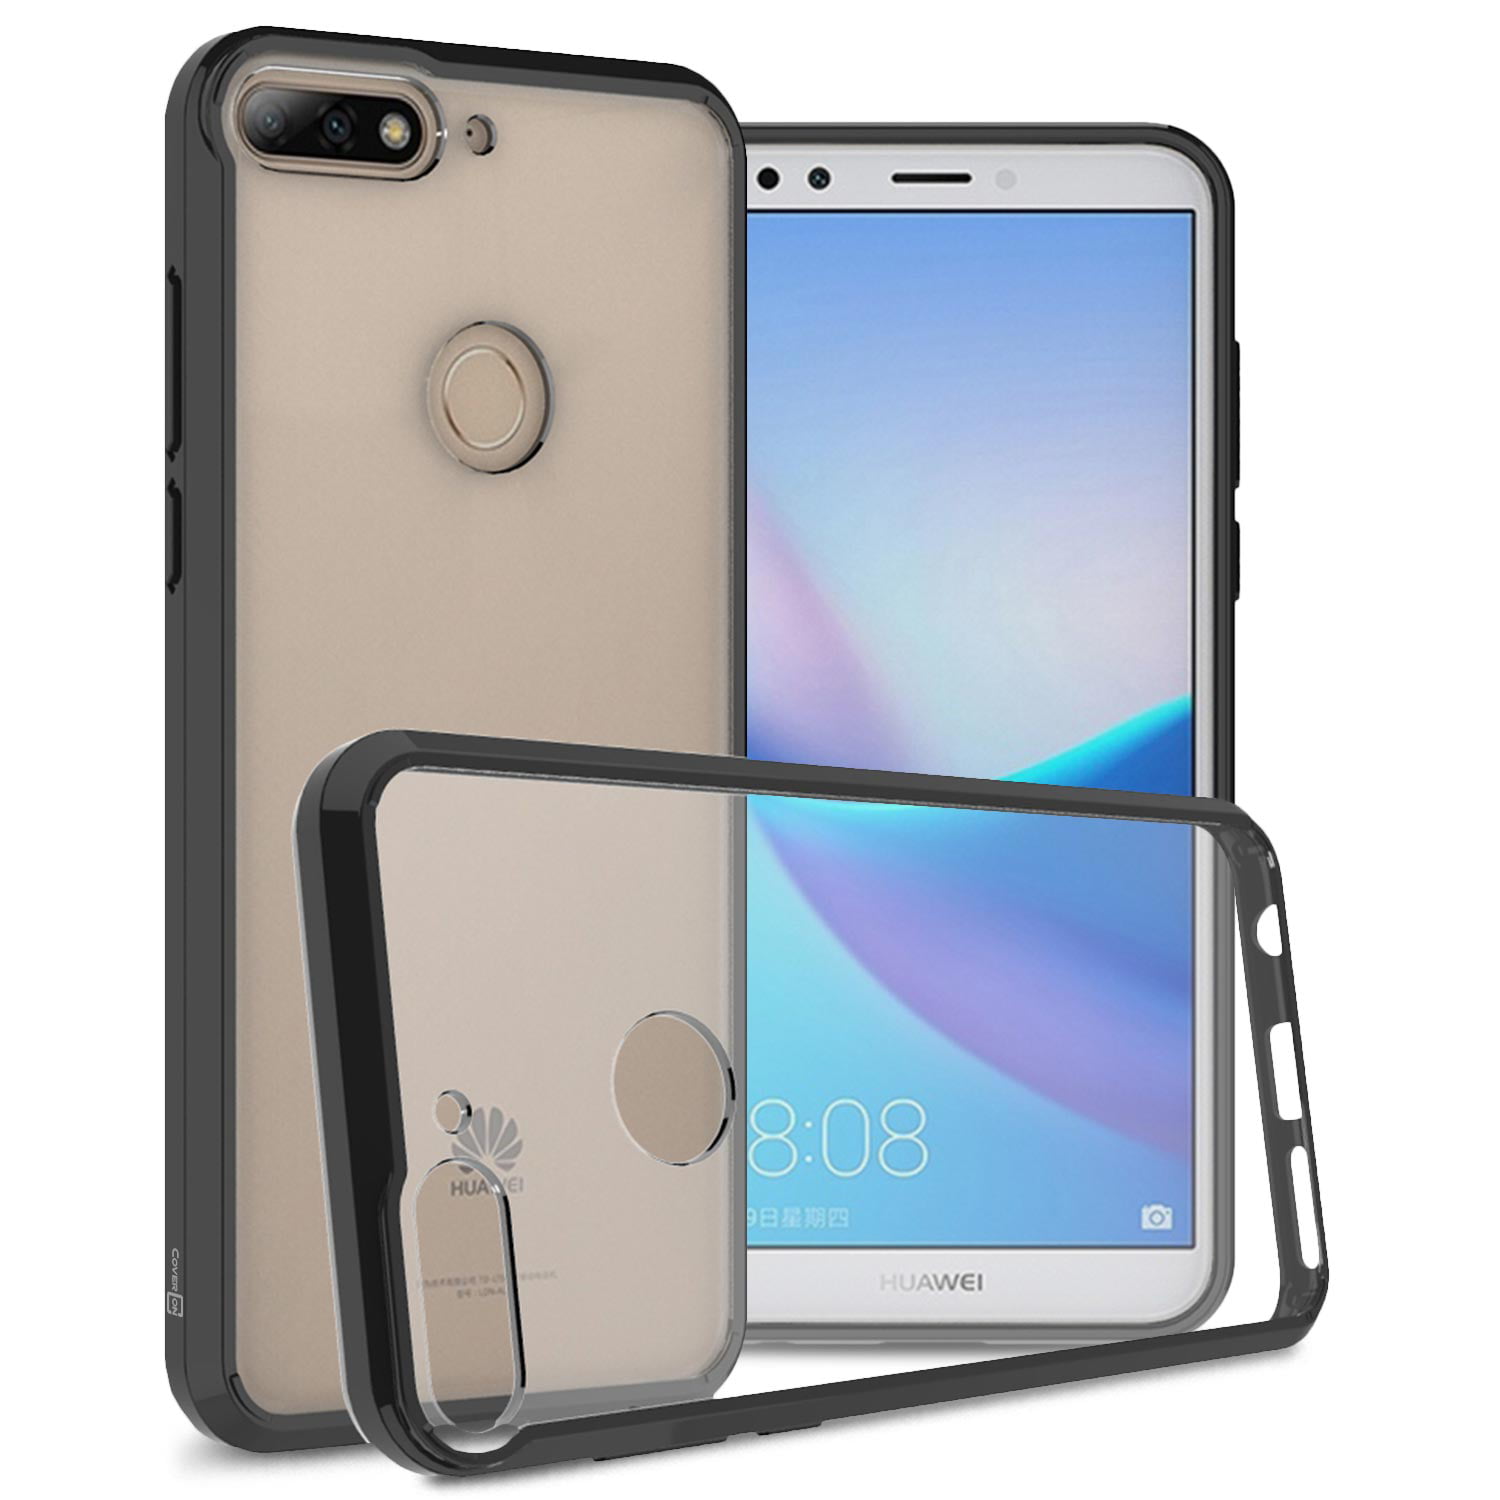 Coveron Huawei Y7 Prime 2018 Case Clearguard Series Clear Hard